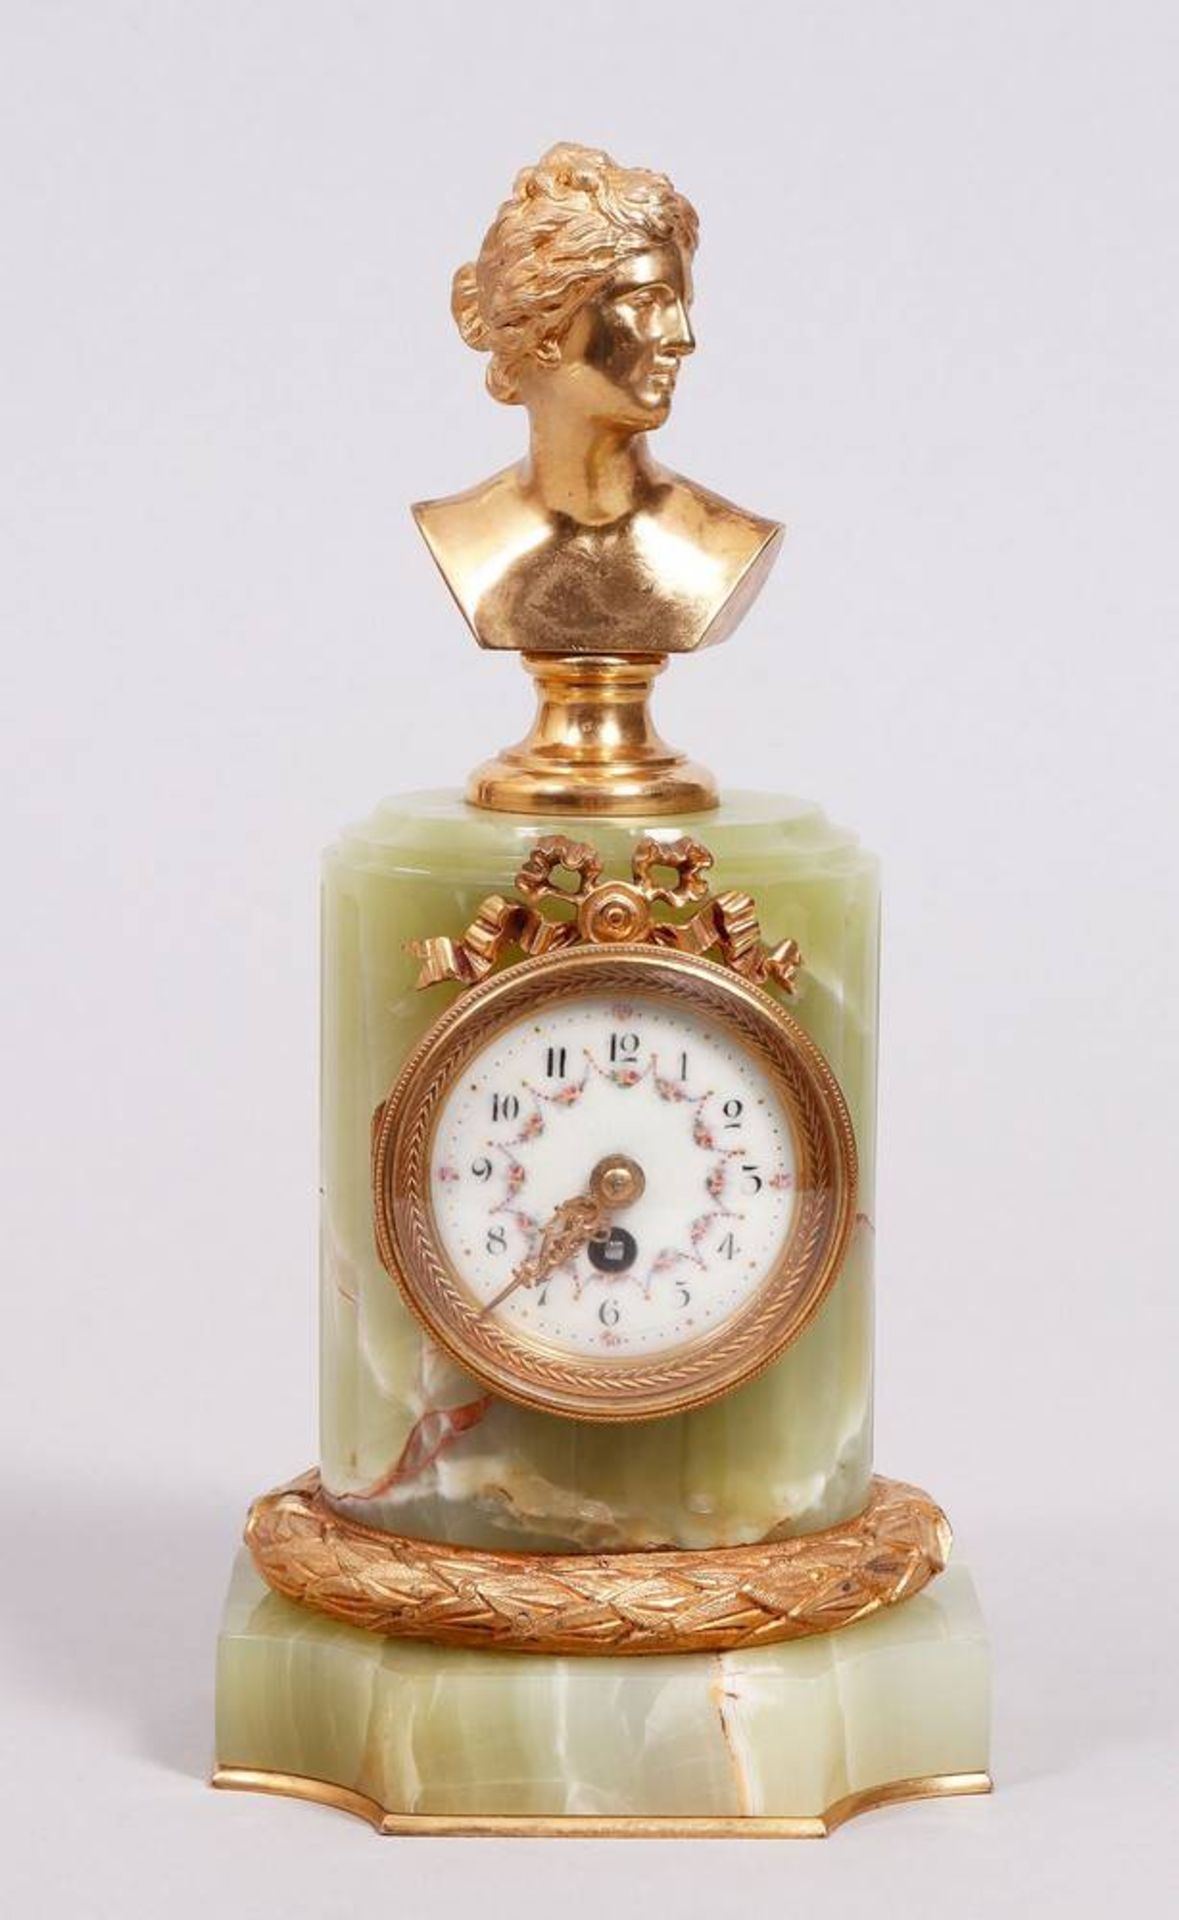 Small table clock, probably France, 19th C.